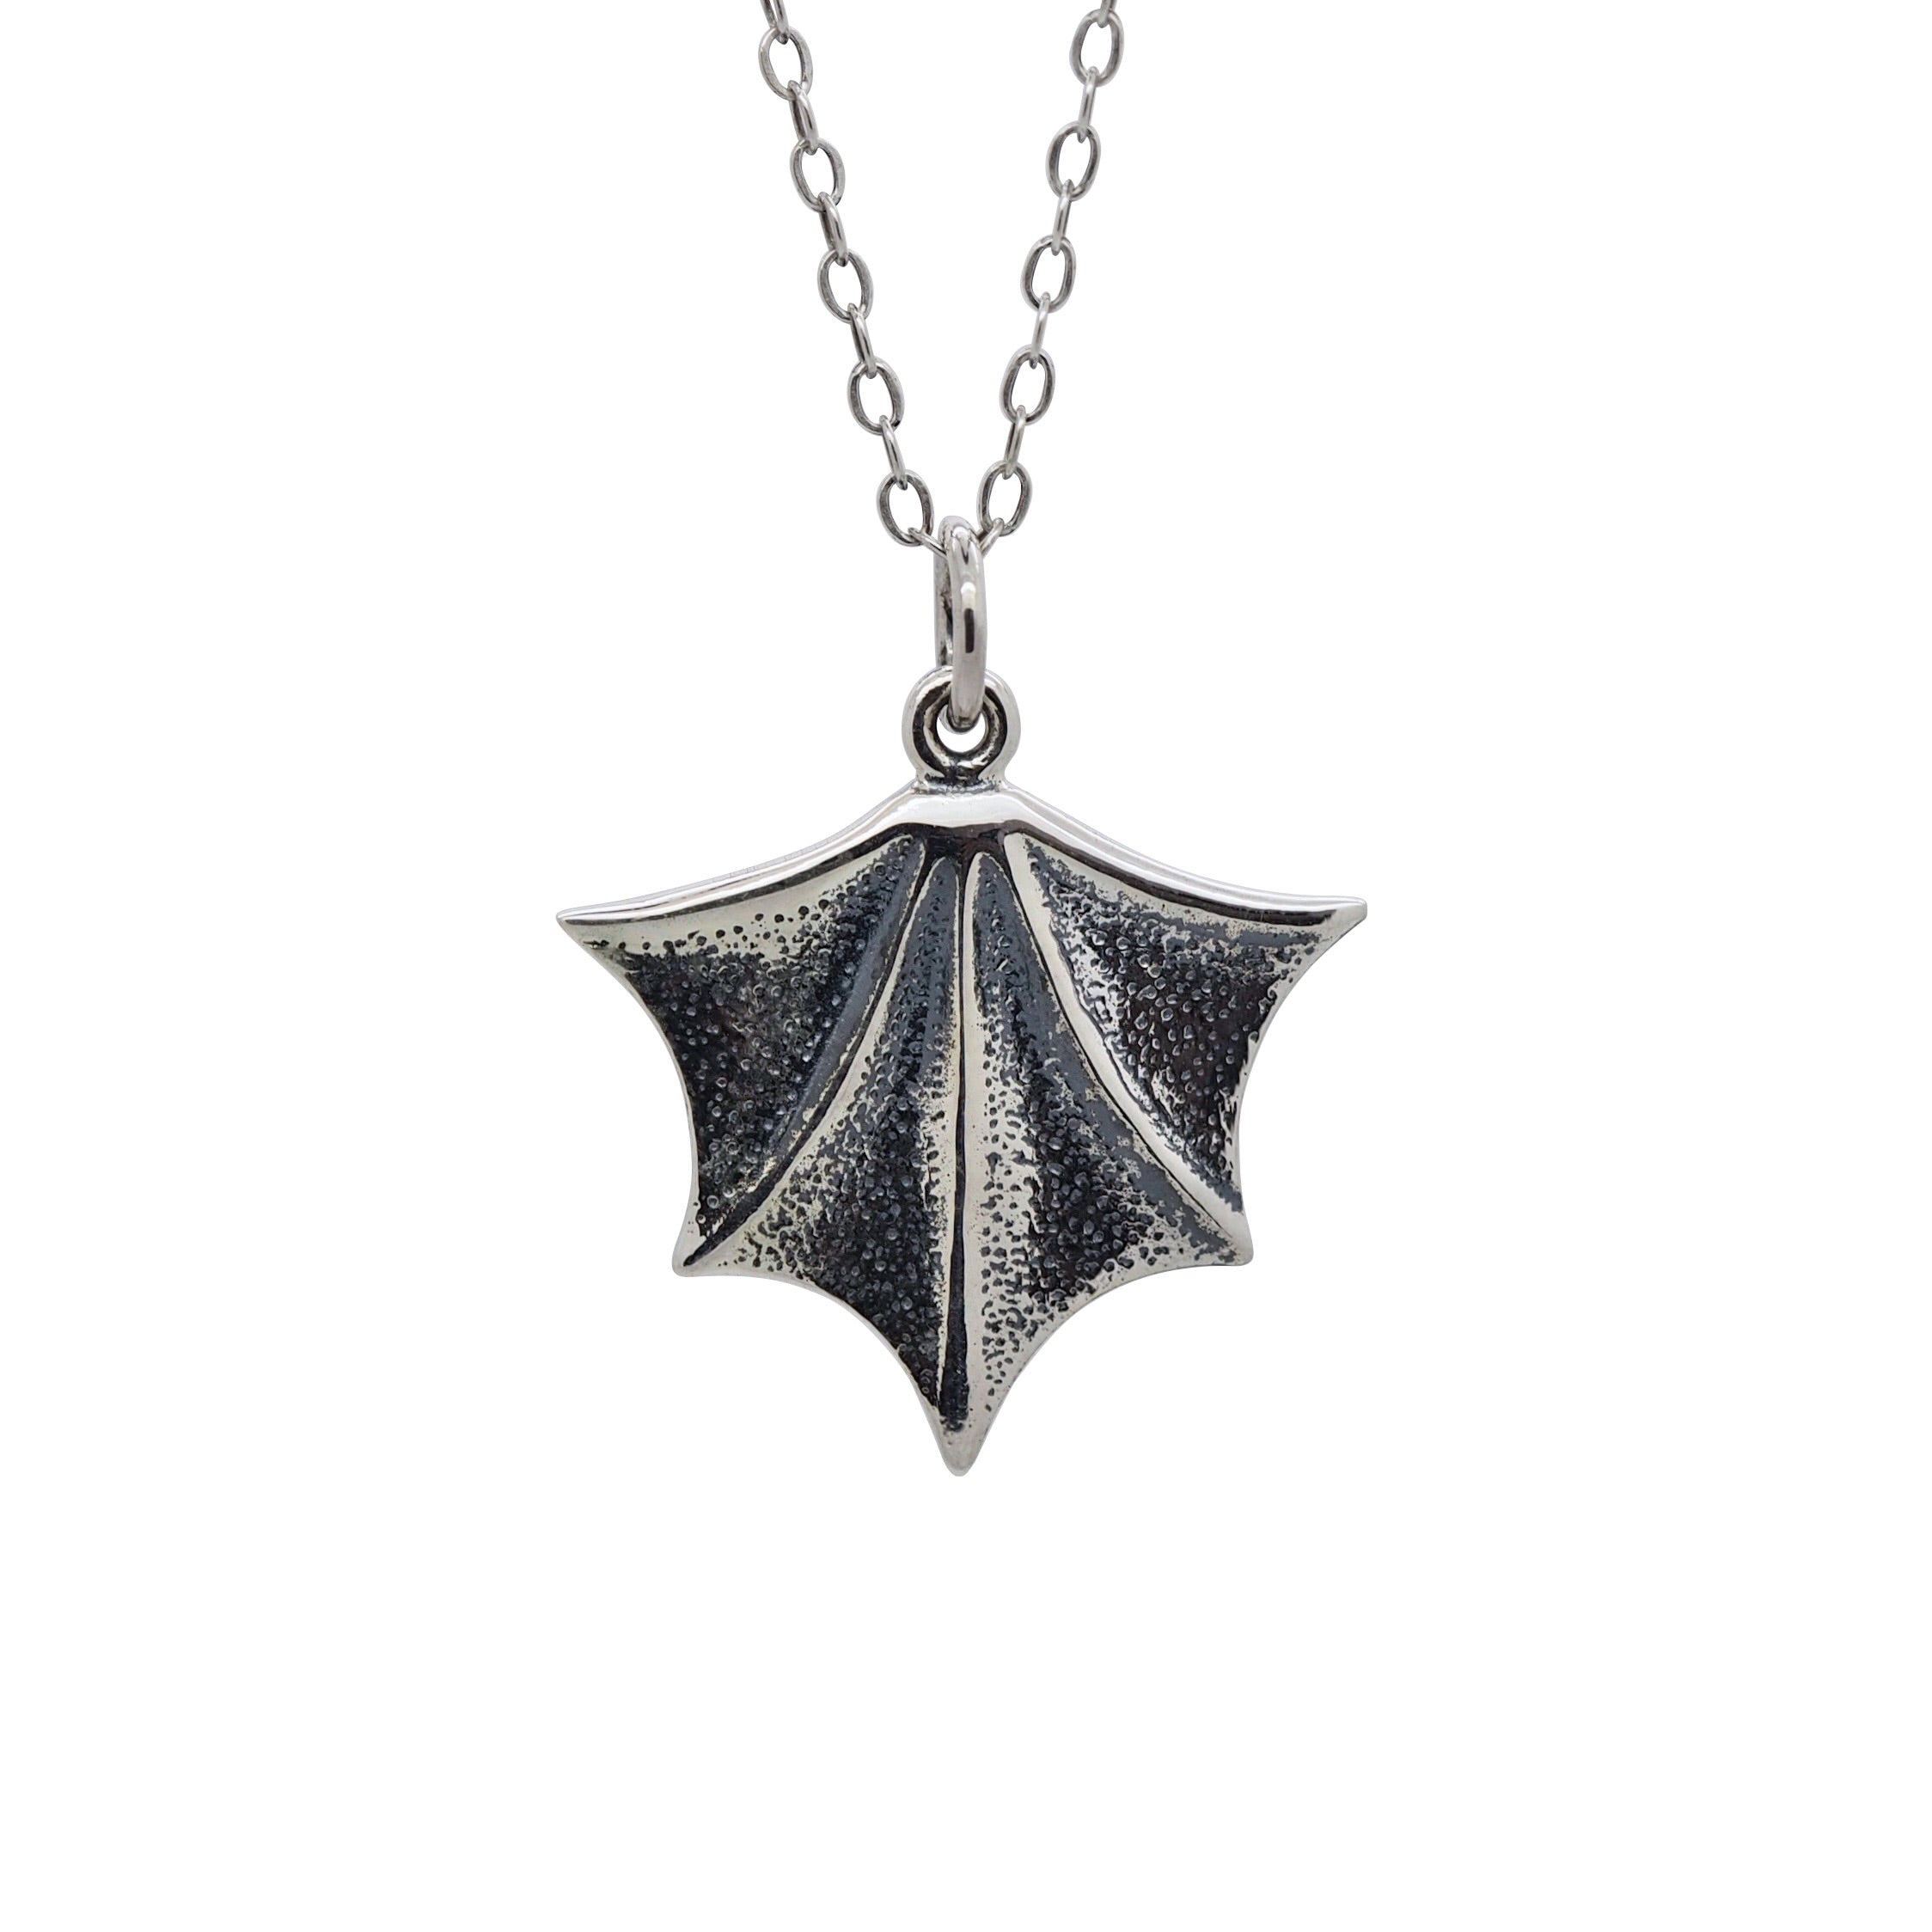 Buy Gothic Bat Chain Necklace Vintage Punk Style With Silver or Black Bat  Pendant Online in India - Etsy